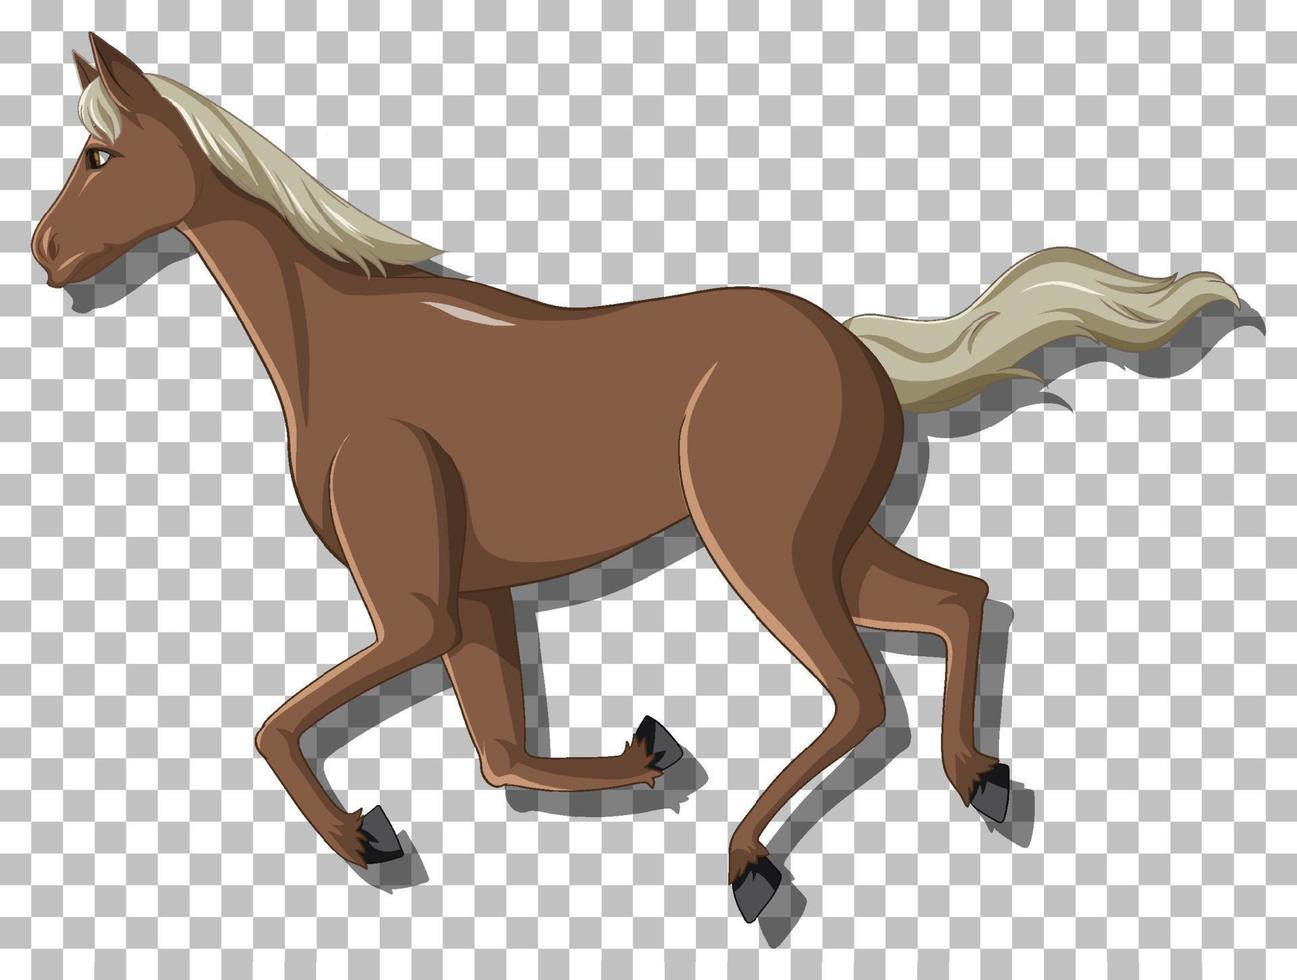 Brown horse on grid background vector